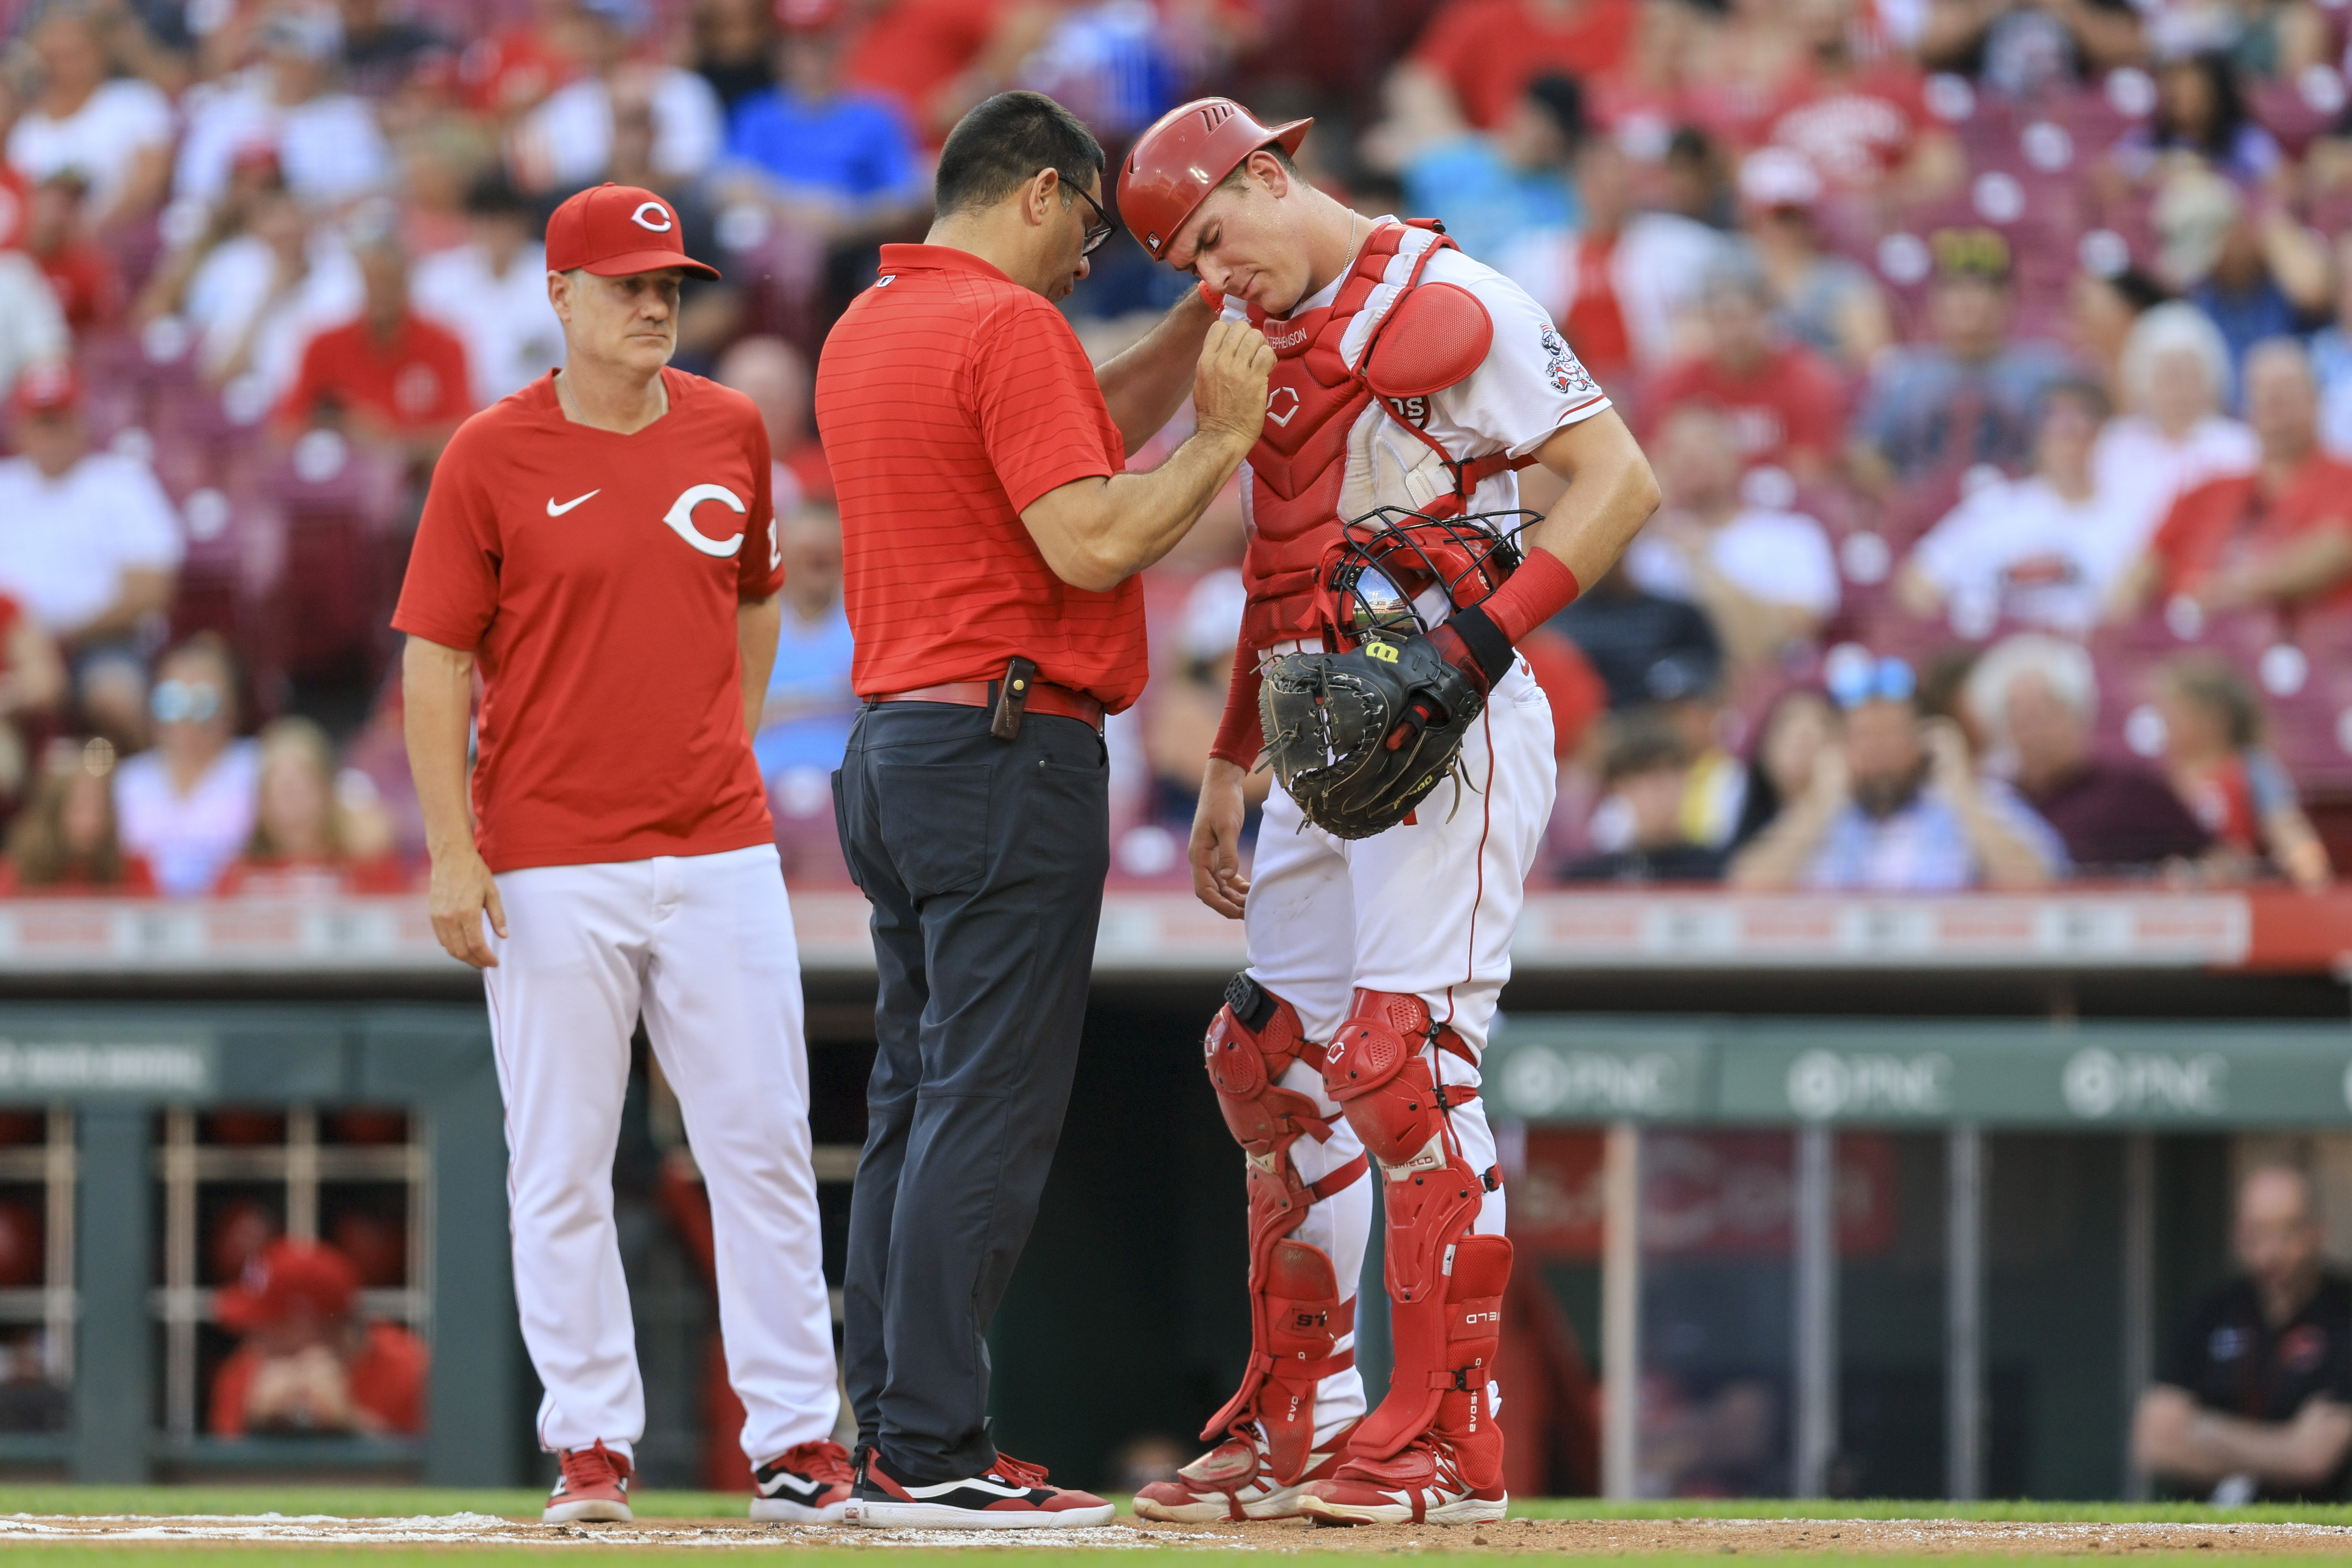 Ask Hal: Should Reds keep Stephenson at catcher?